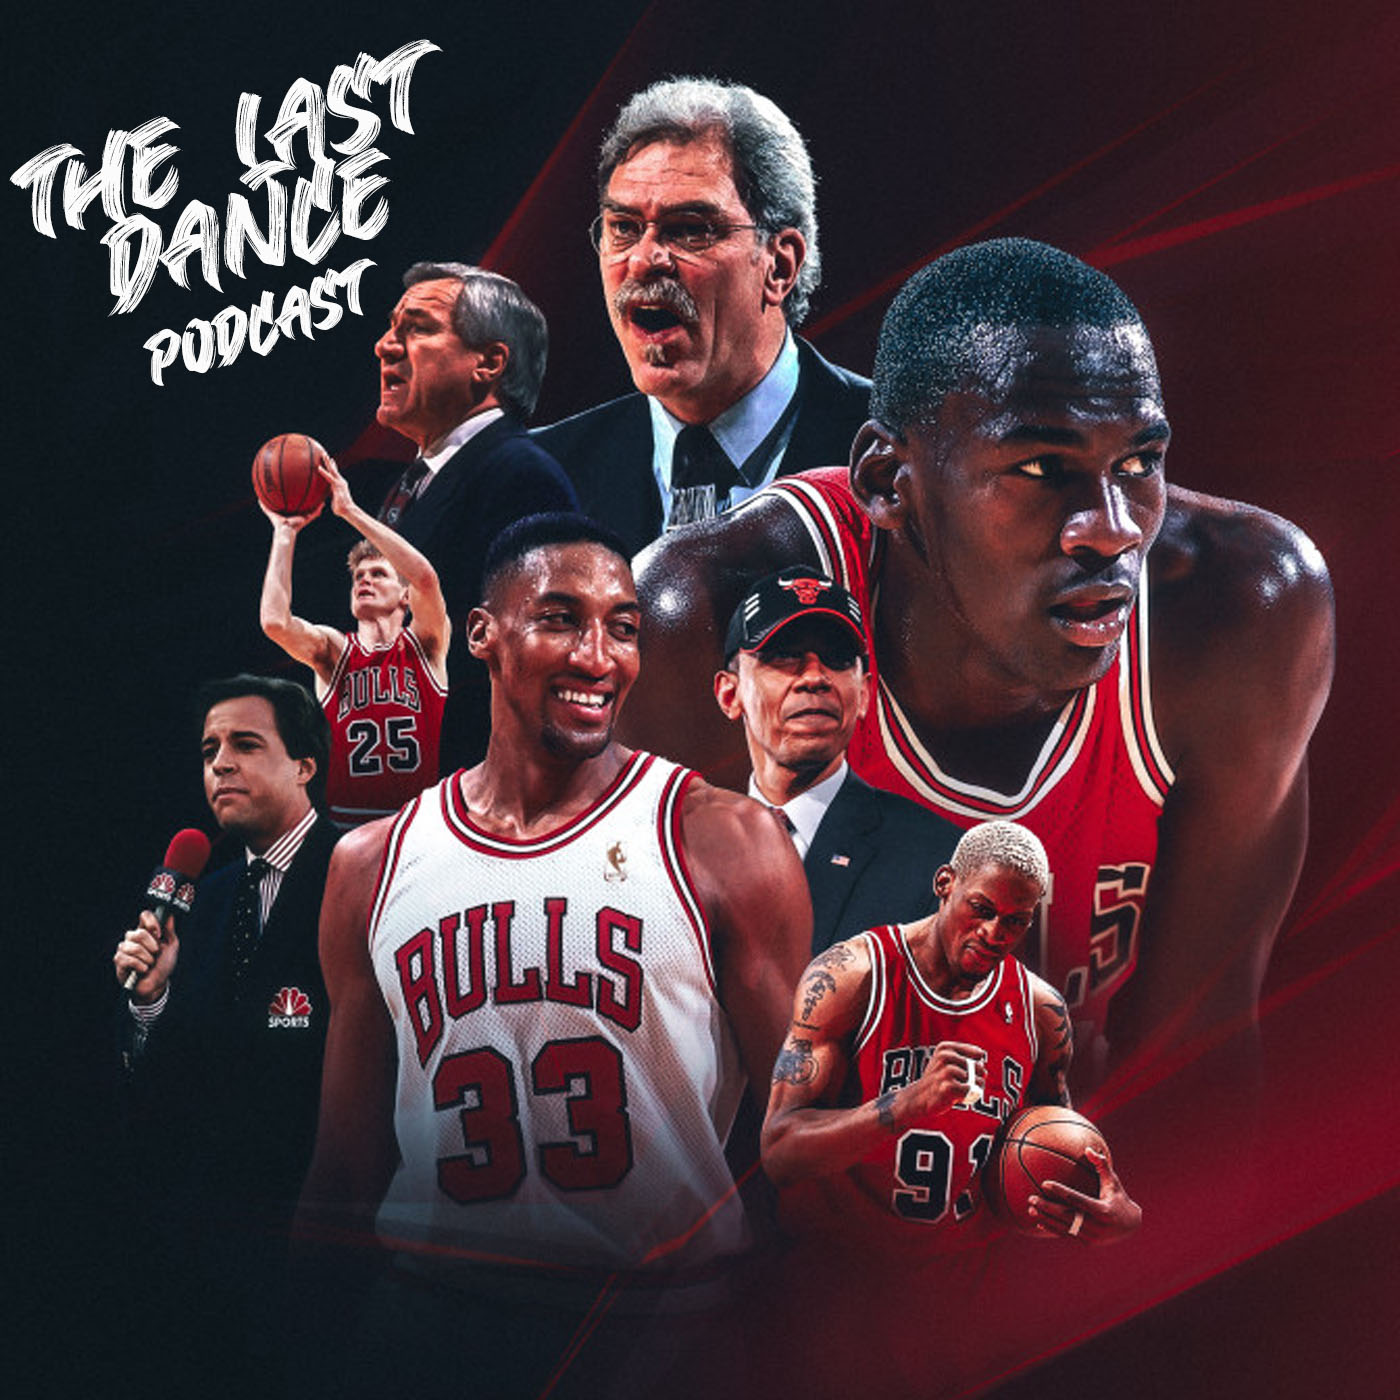 Crux Media Presents "The Last Dance Podcast": The Gather Step